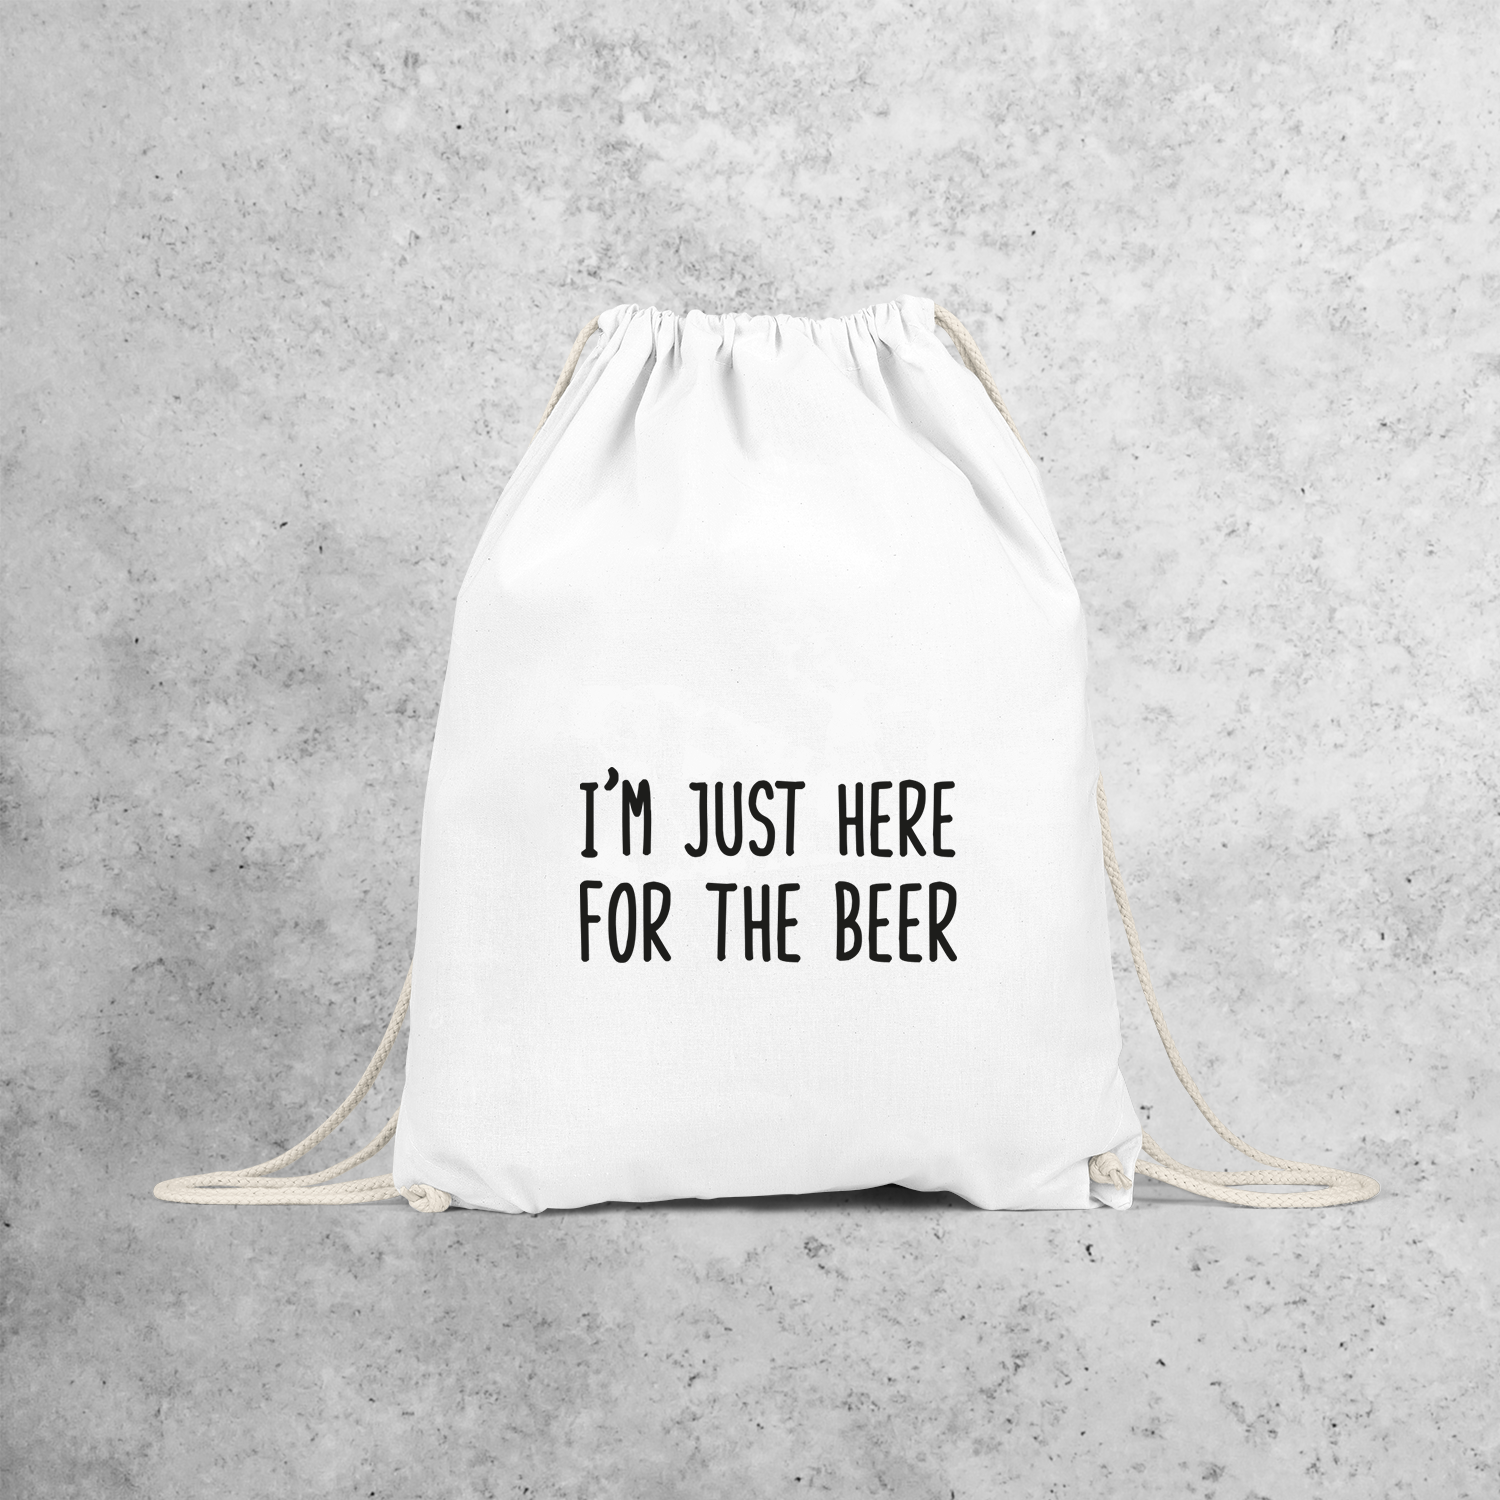 'I'm just here for the beer' backpack